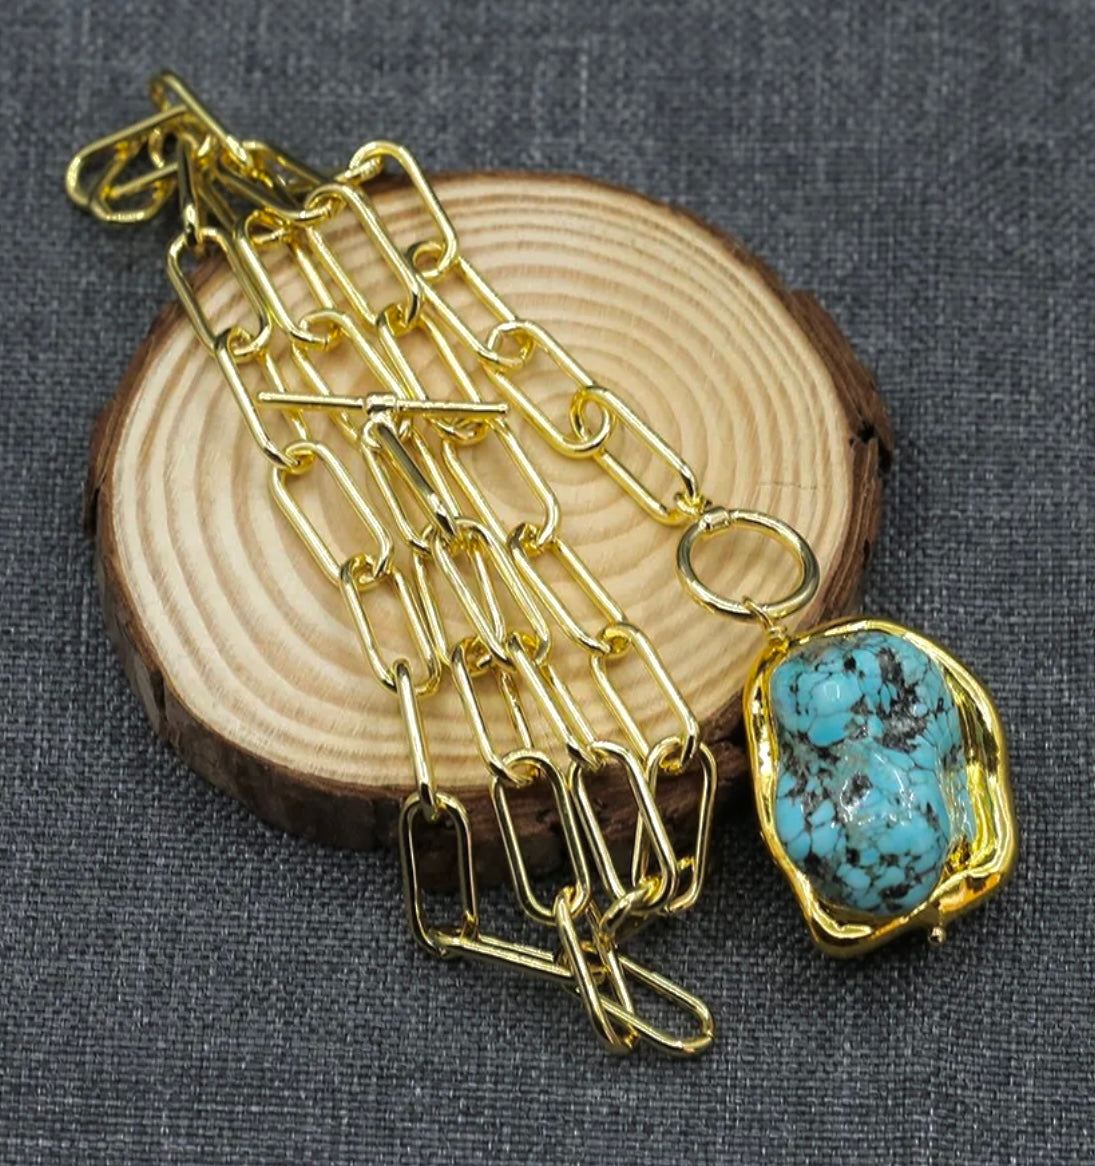 Gold-Filled Chain Necklace with Turquoise Nugget Pendant 21”